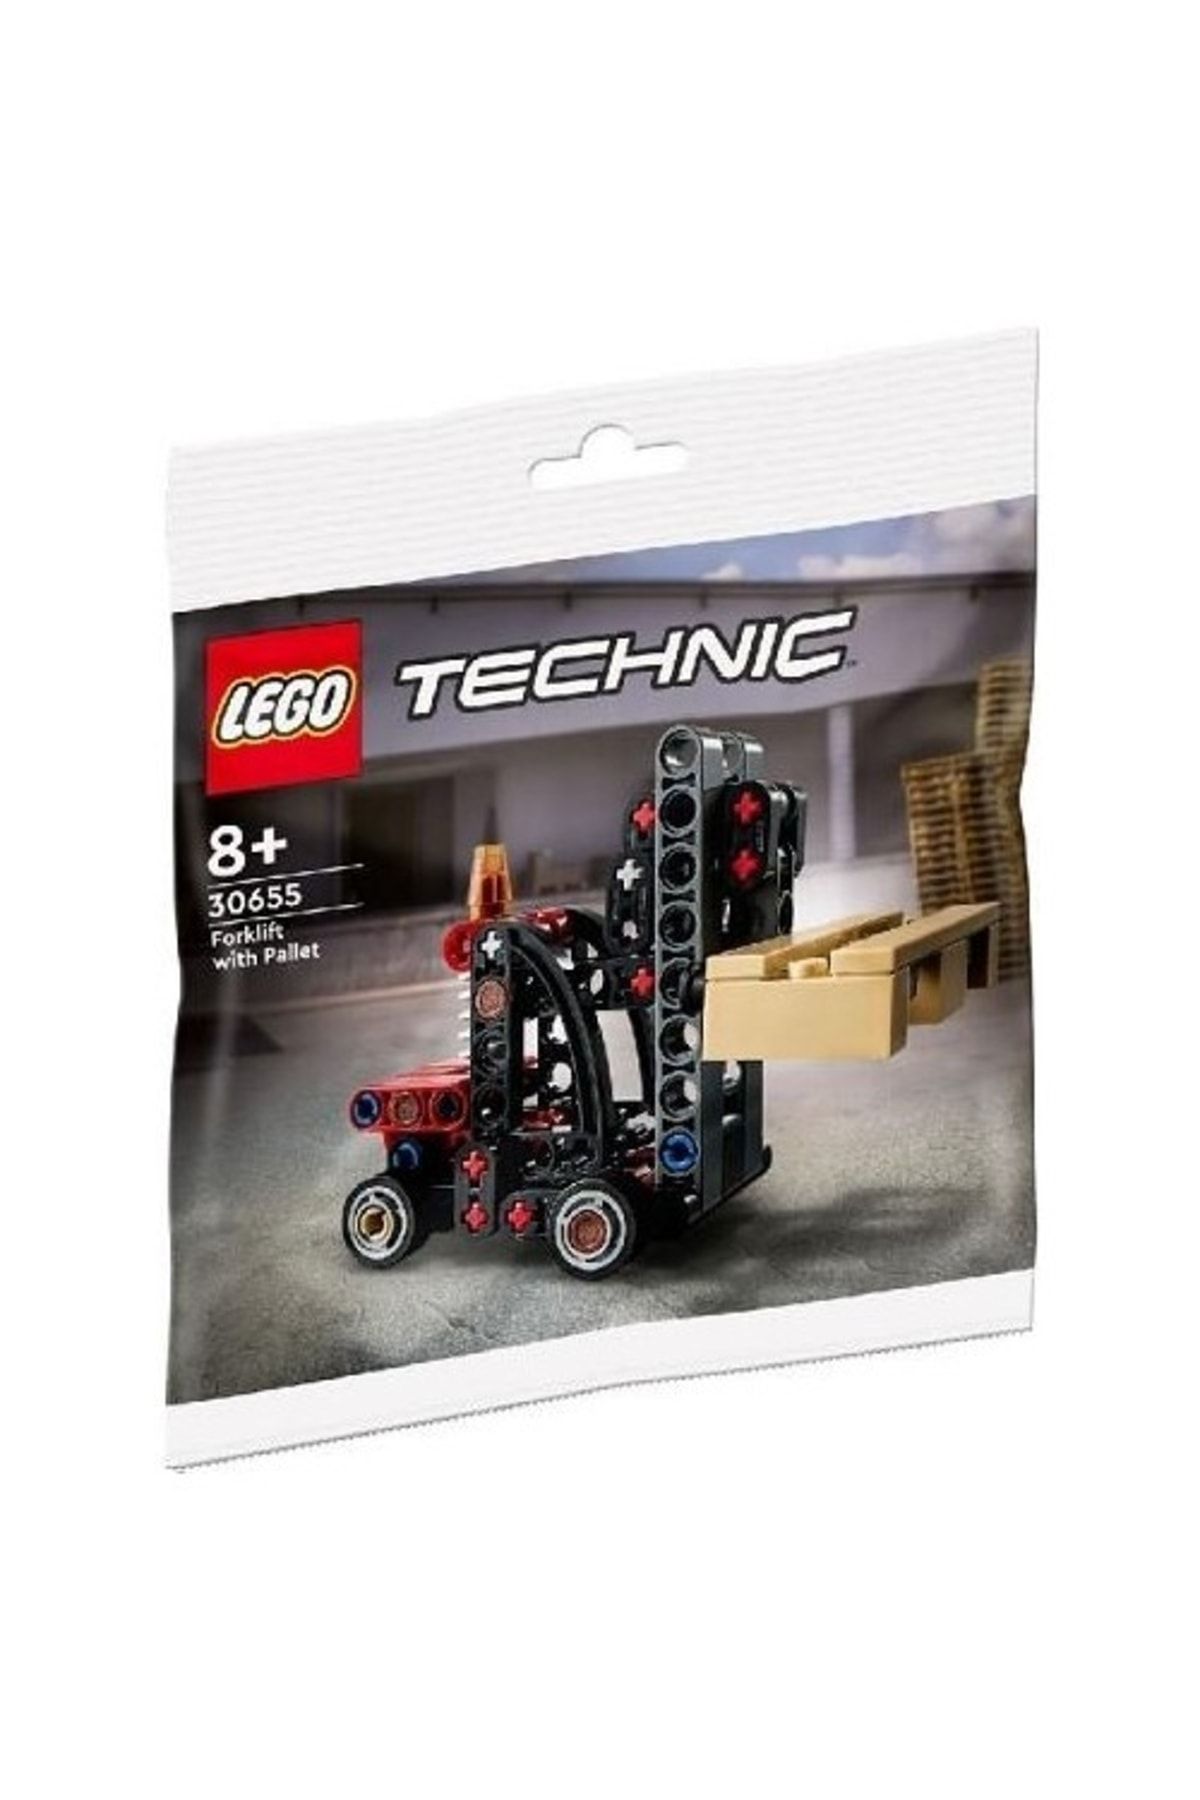 LEGO Technic 30655 Forklift With Pallet Polybag